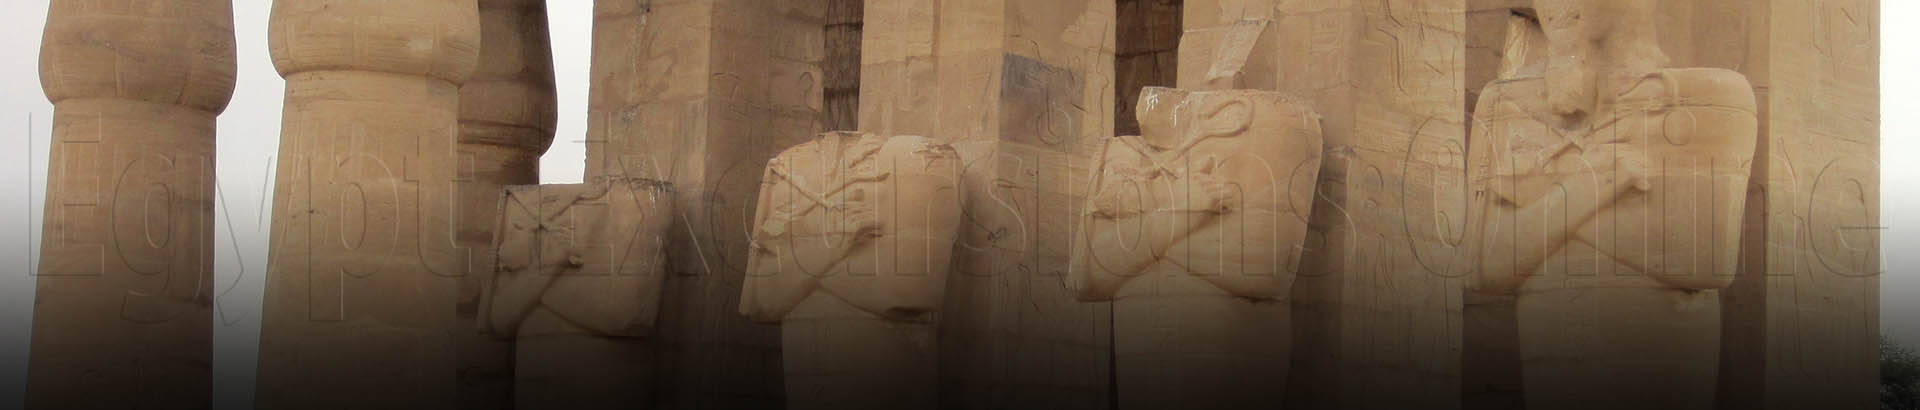 Luxor 5 Day Tours